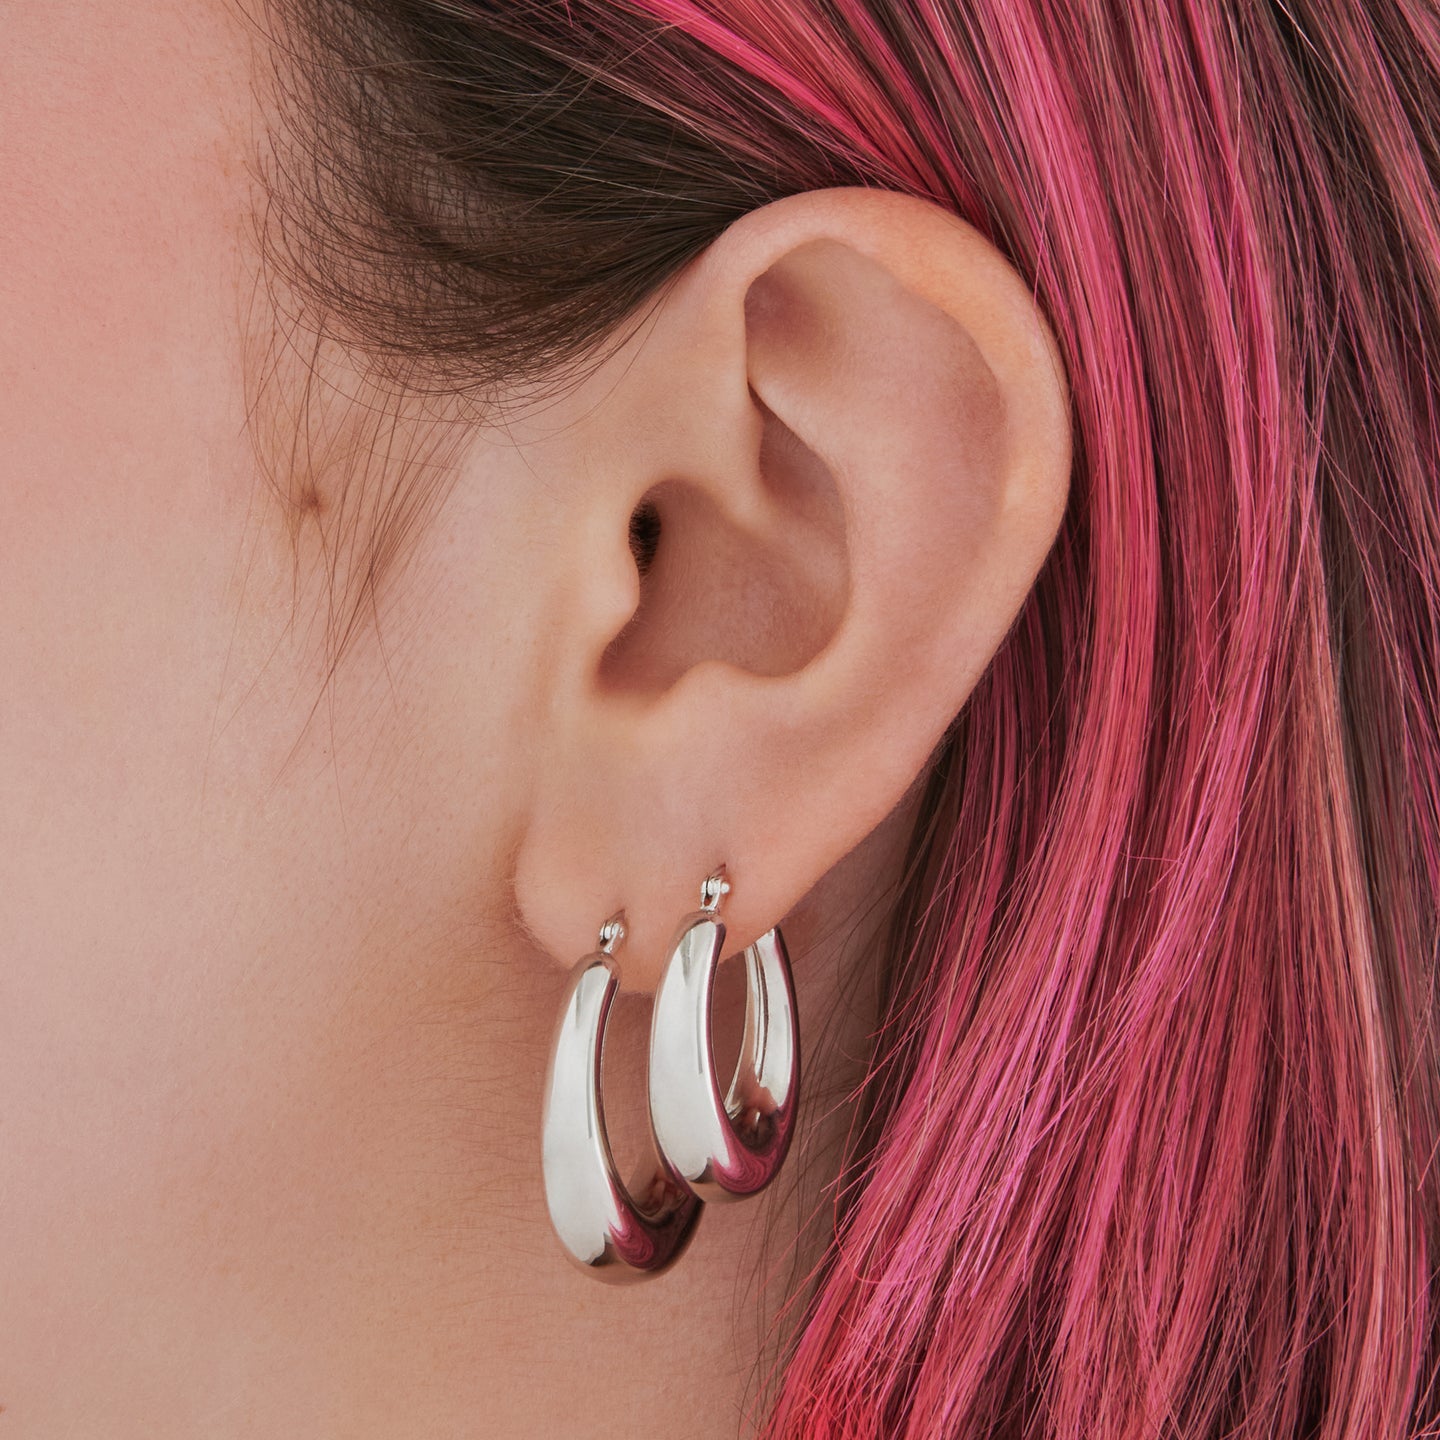 This is a silver, medium-sized, oval crescent shaped hoop on ear. [hover] color:null|silver